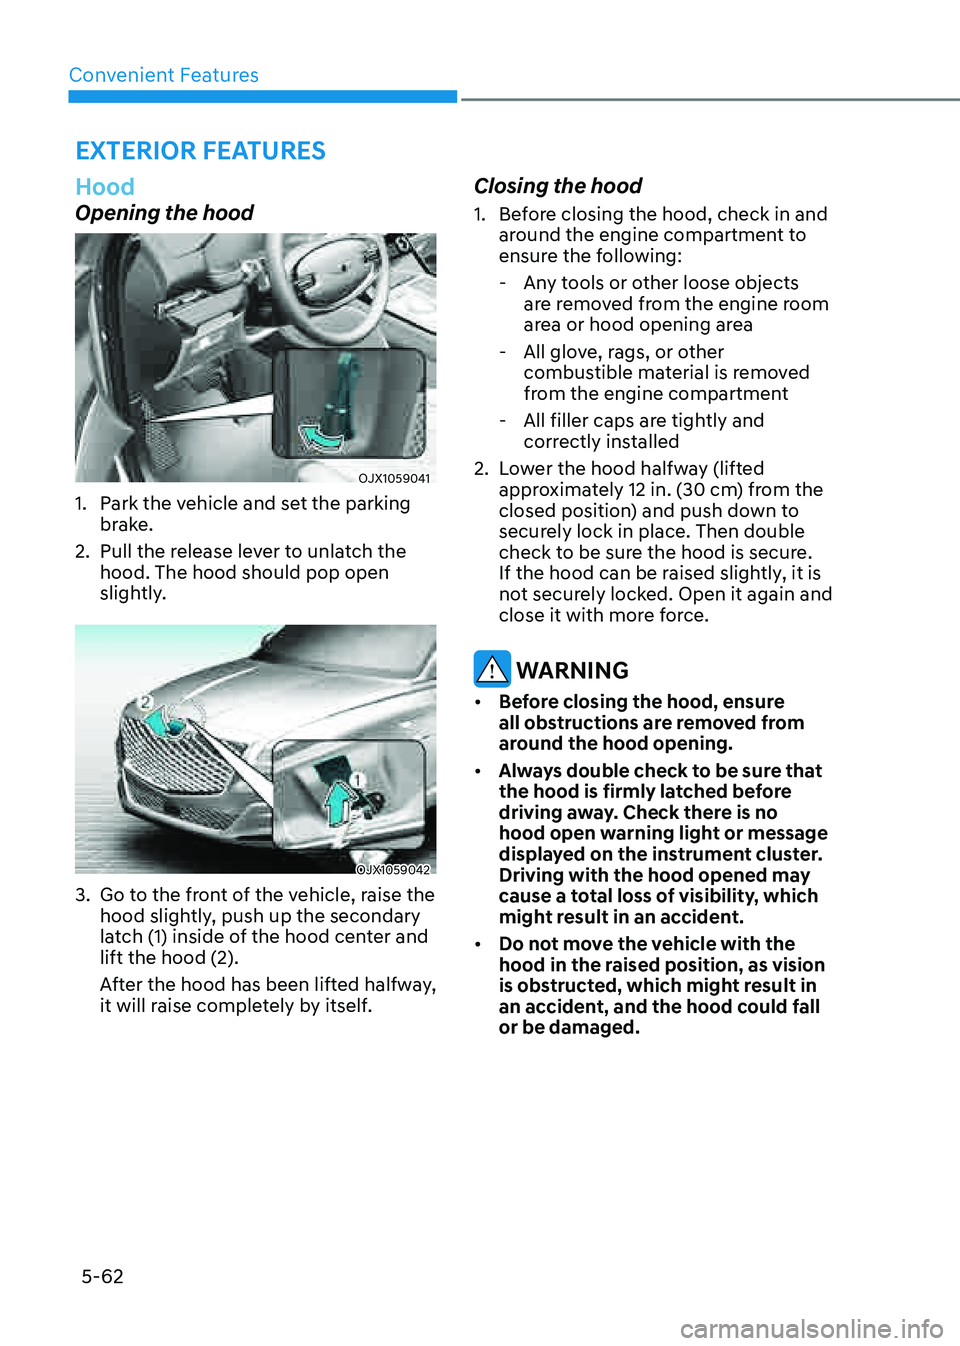 GENESIS GV80 2021  Owners Manual Convenient Features
5-62
Hood
Opening the hood
OJX1059041 OJX1059041 
1. Park the vehicle and set the parking 
brake.
2. Pull the release lever to unlatch the 
hood. The hood should pop open 
slightly